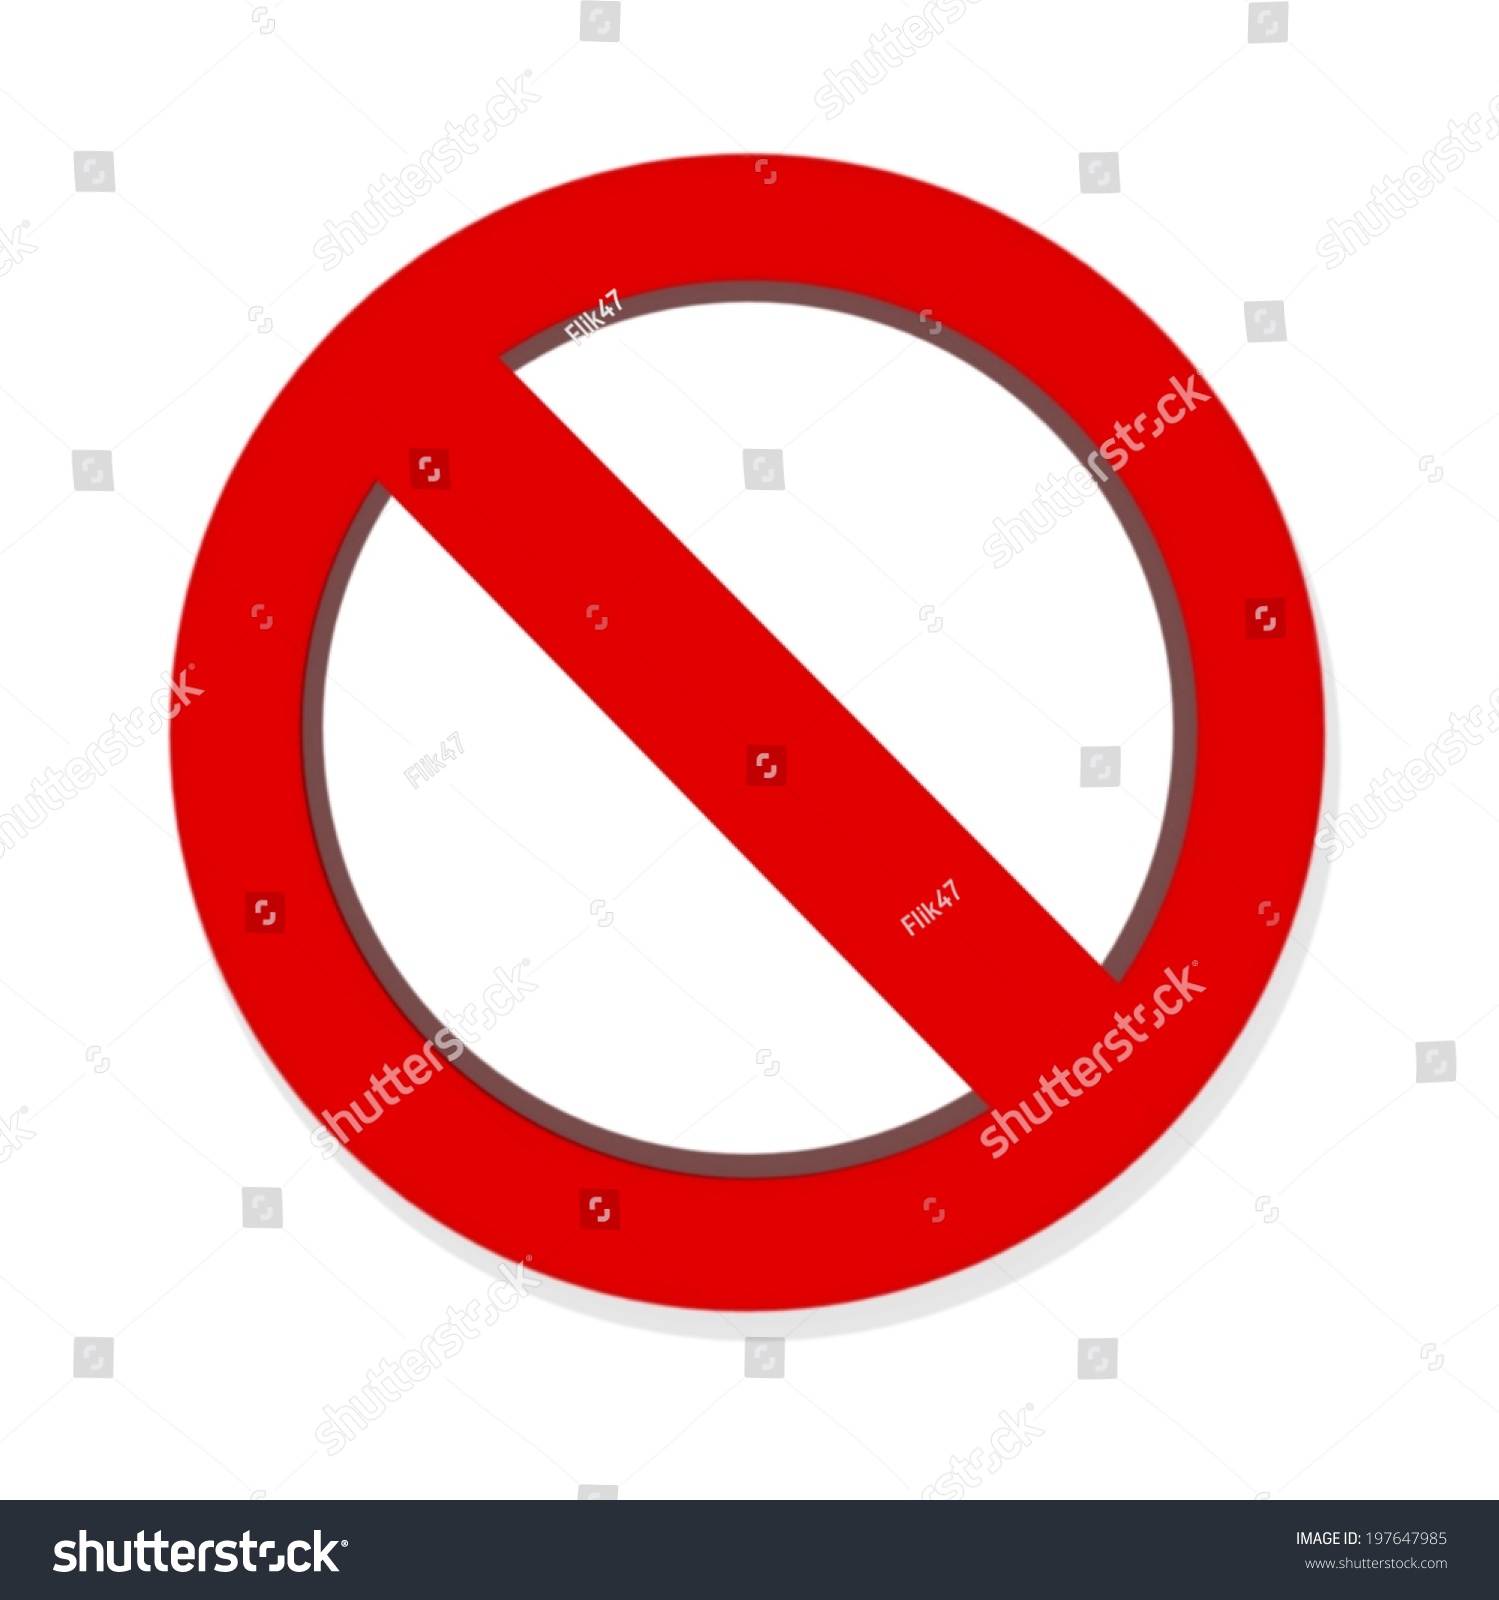 Do Not red warning sign isolated on white background #197647985